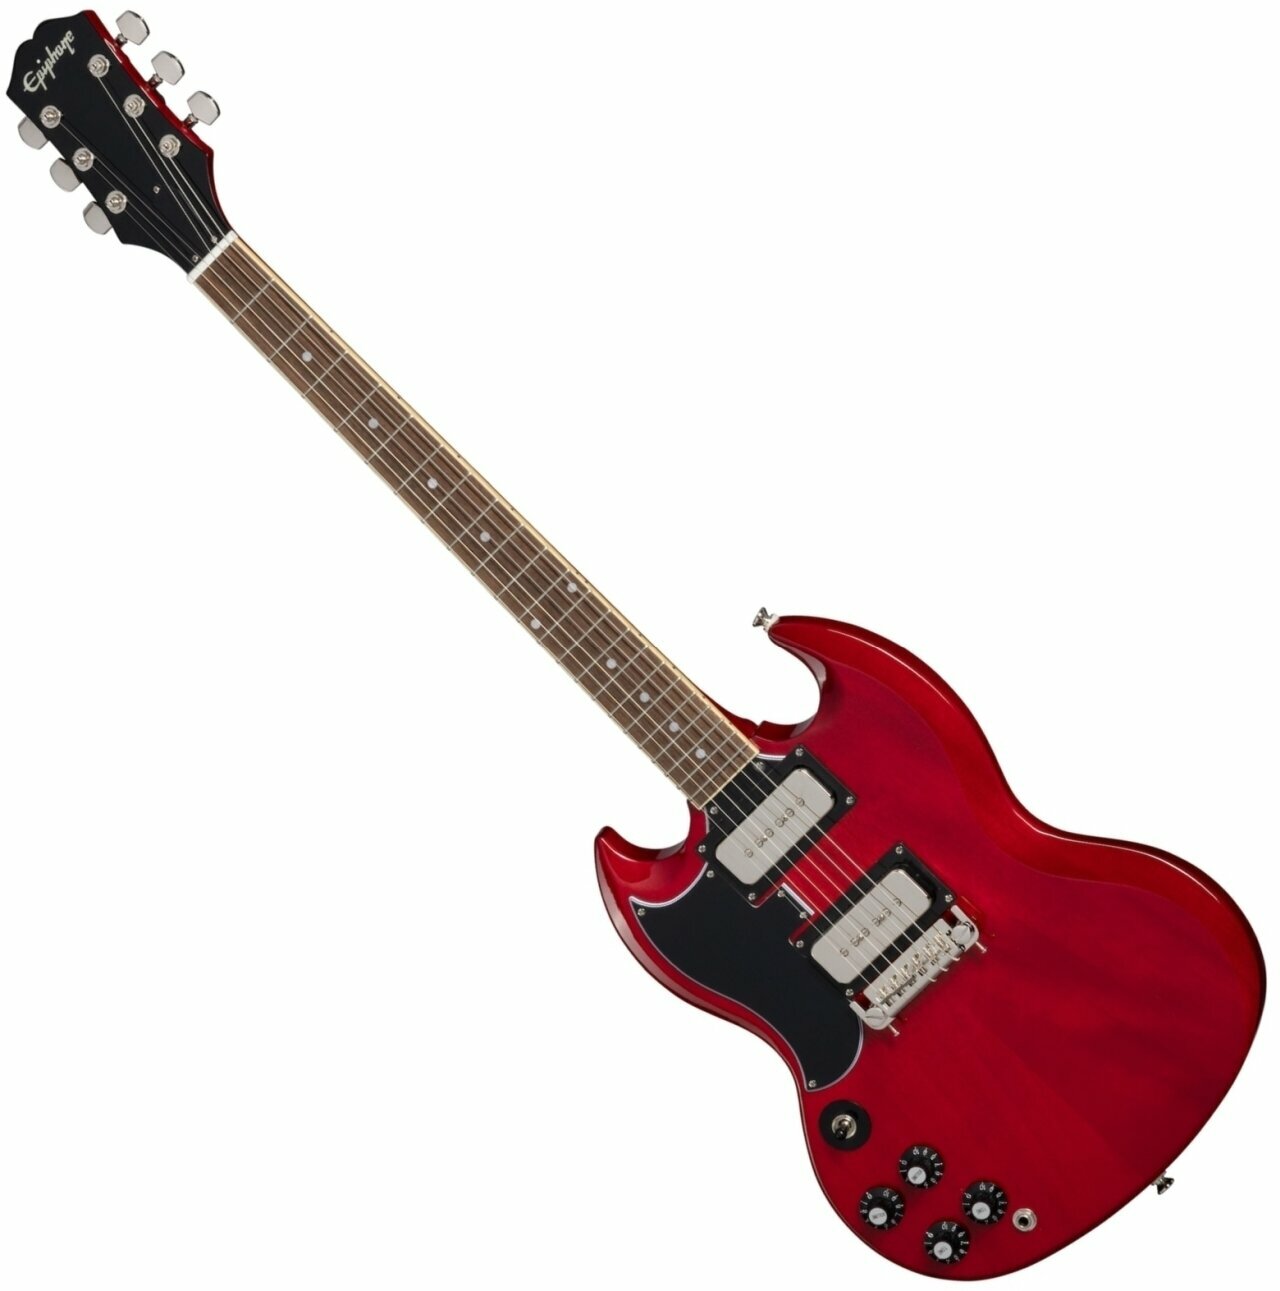 Epiphone Tony Iommi SG Special LH Vintage Cherry Red